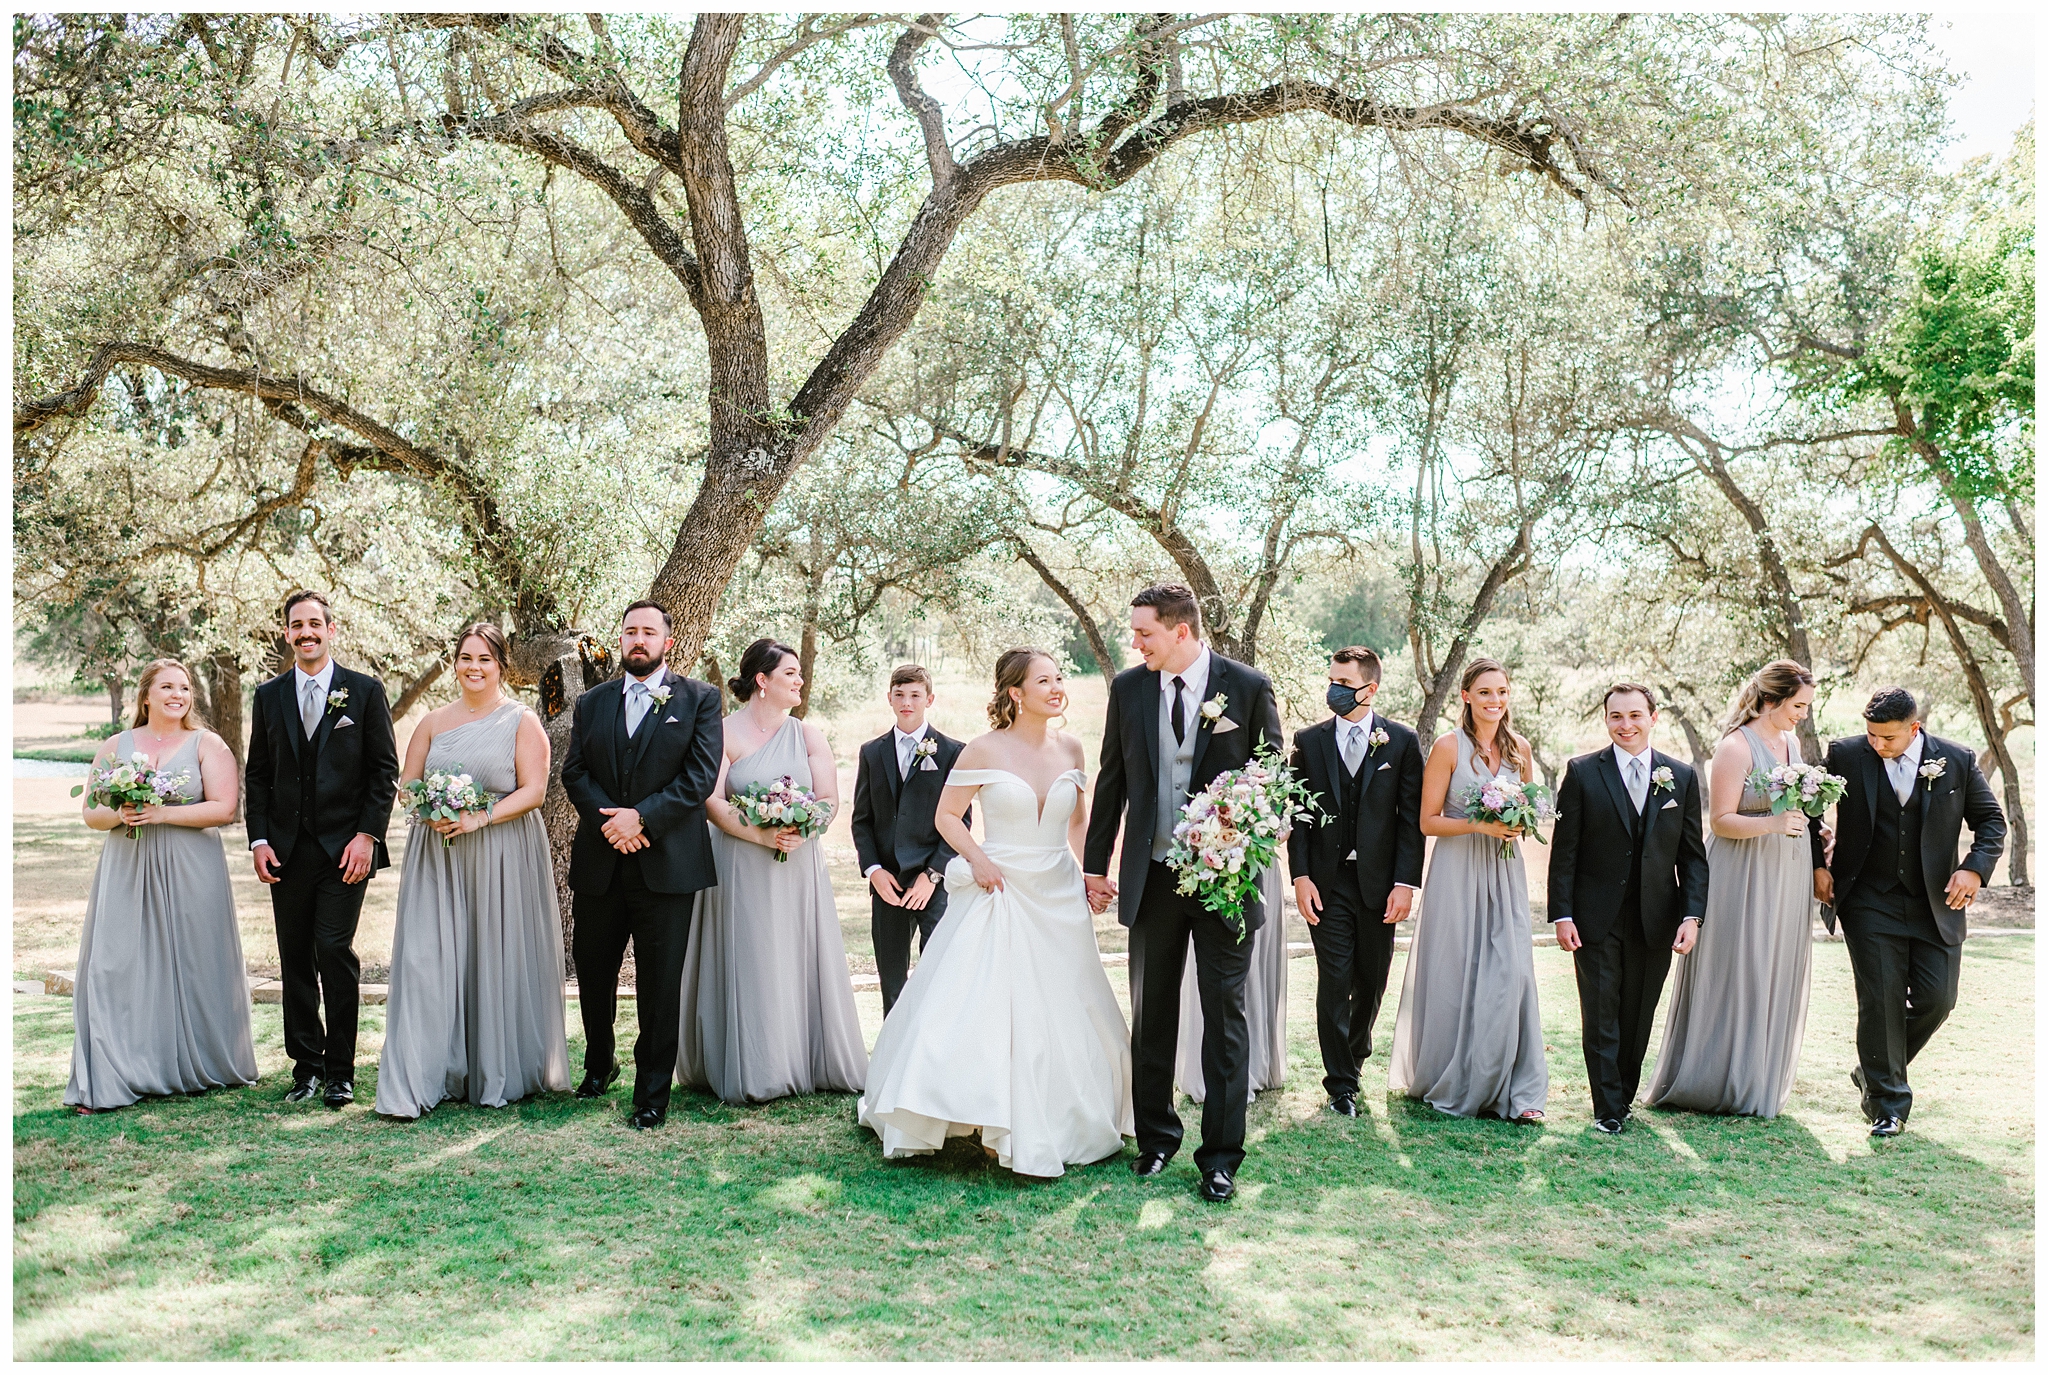 Gorgeous Plum and Violet Summer Wedding at Ma Maison